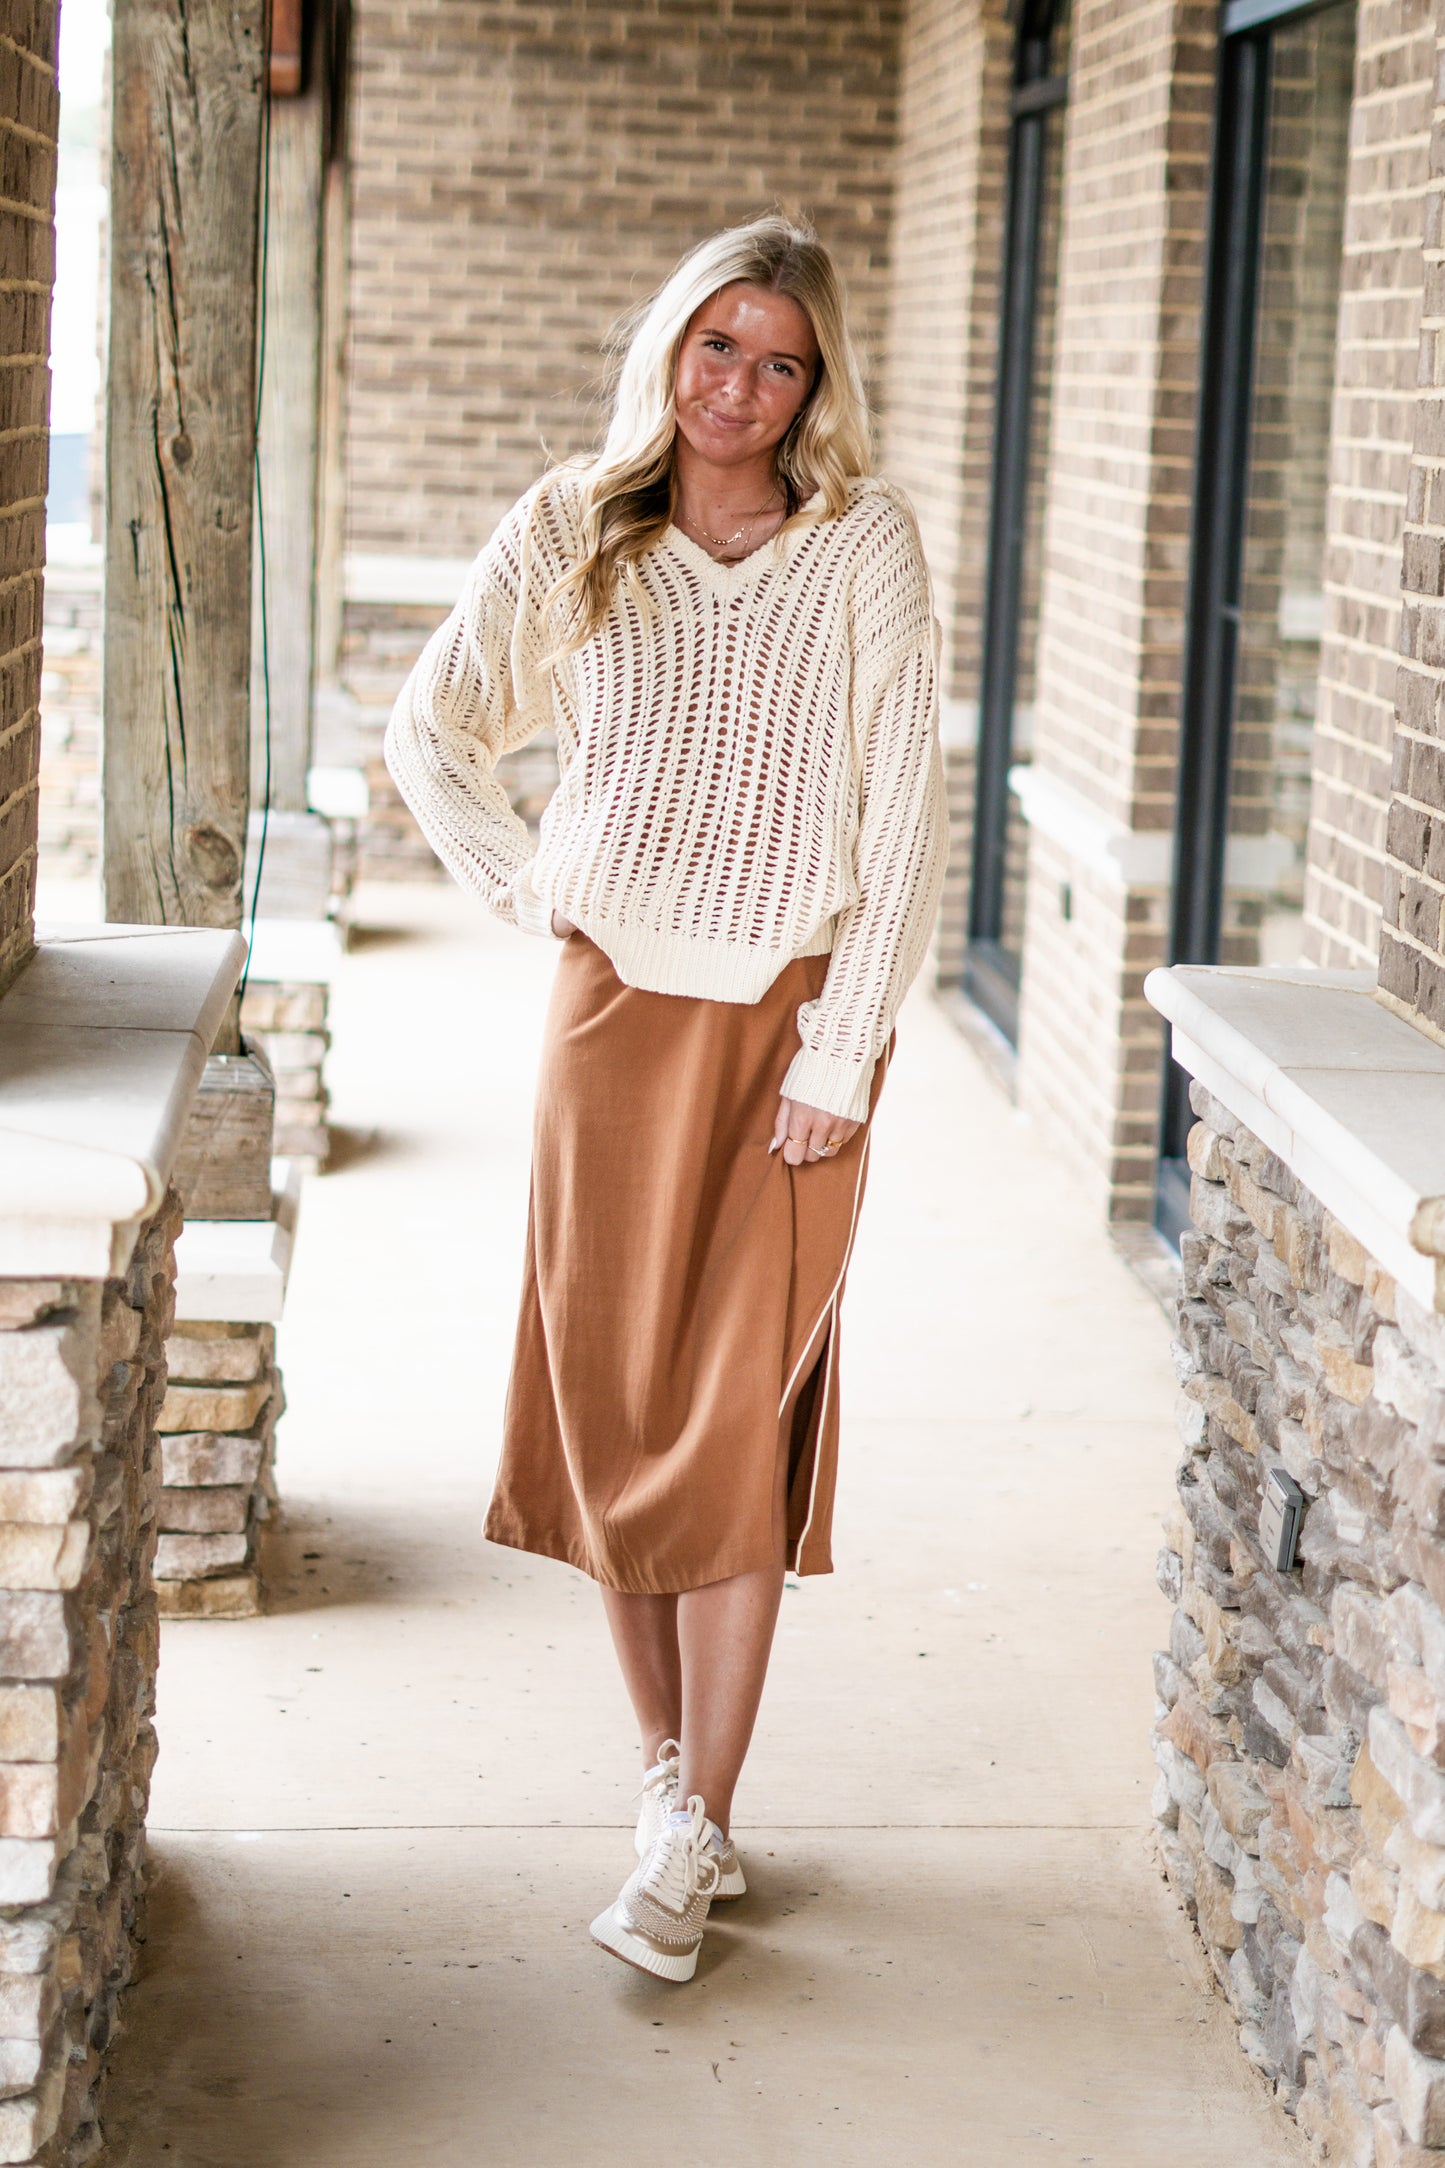 Olivia Open Knit Hooded Sweater Hooded Neckline Drawstrings Long Sleeves Open Knit Material Color/ Cream Waistline Length Relaxed Fit. Blonde model, tweed tennis shoes, sweater worn over burnt orange dress. Brick and stone background.